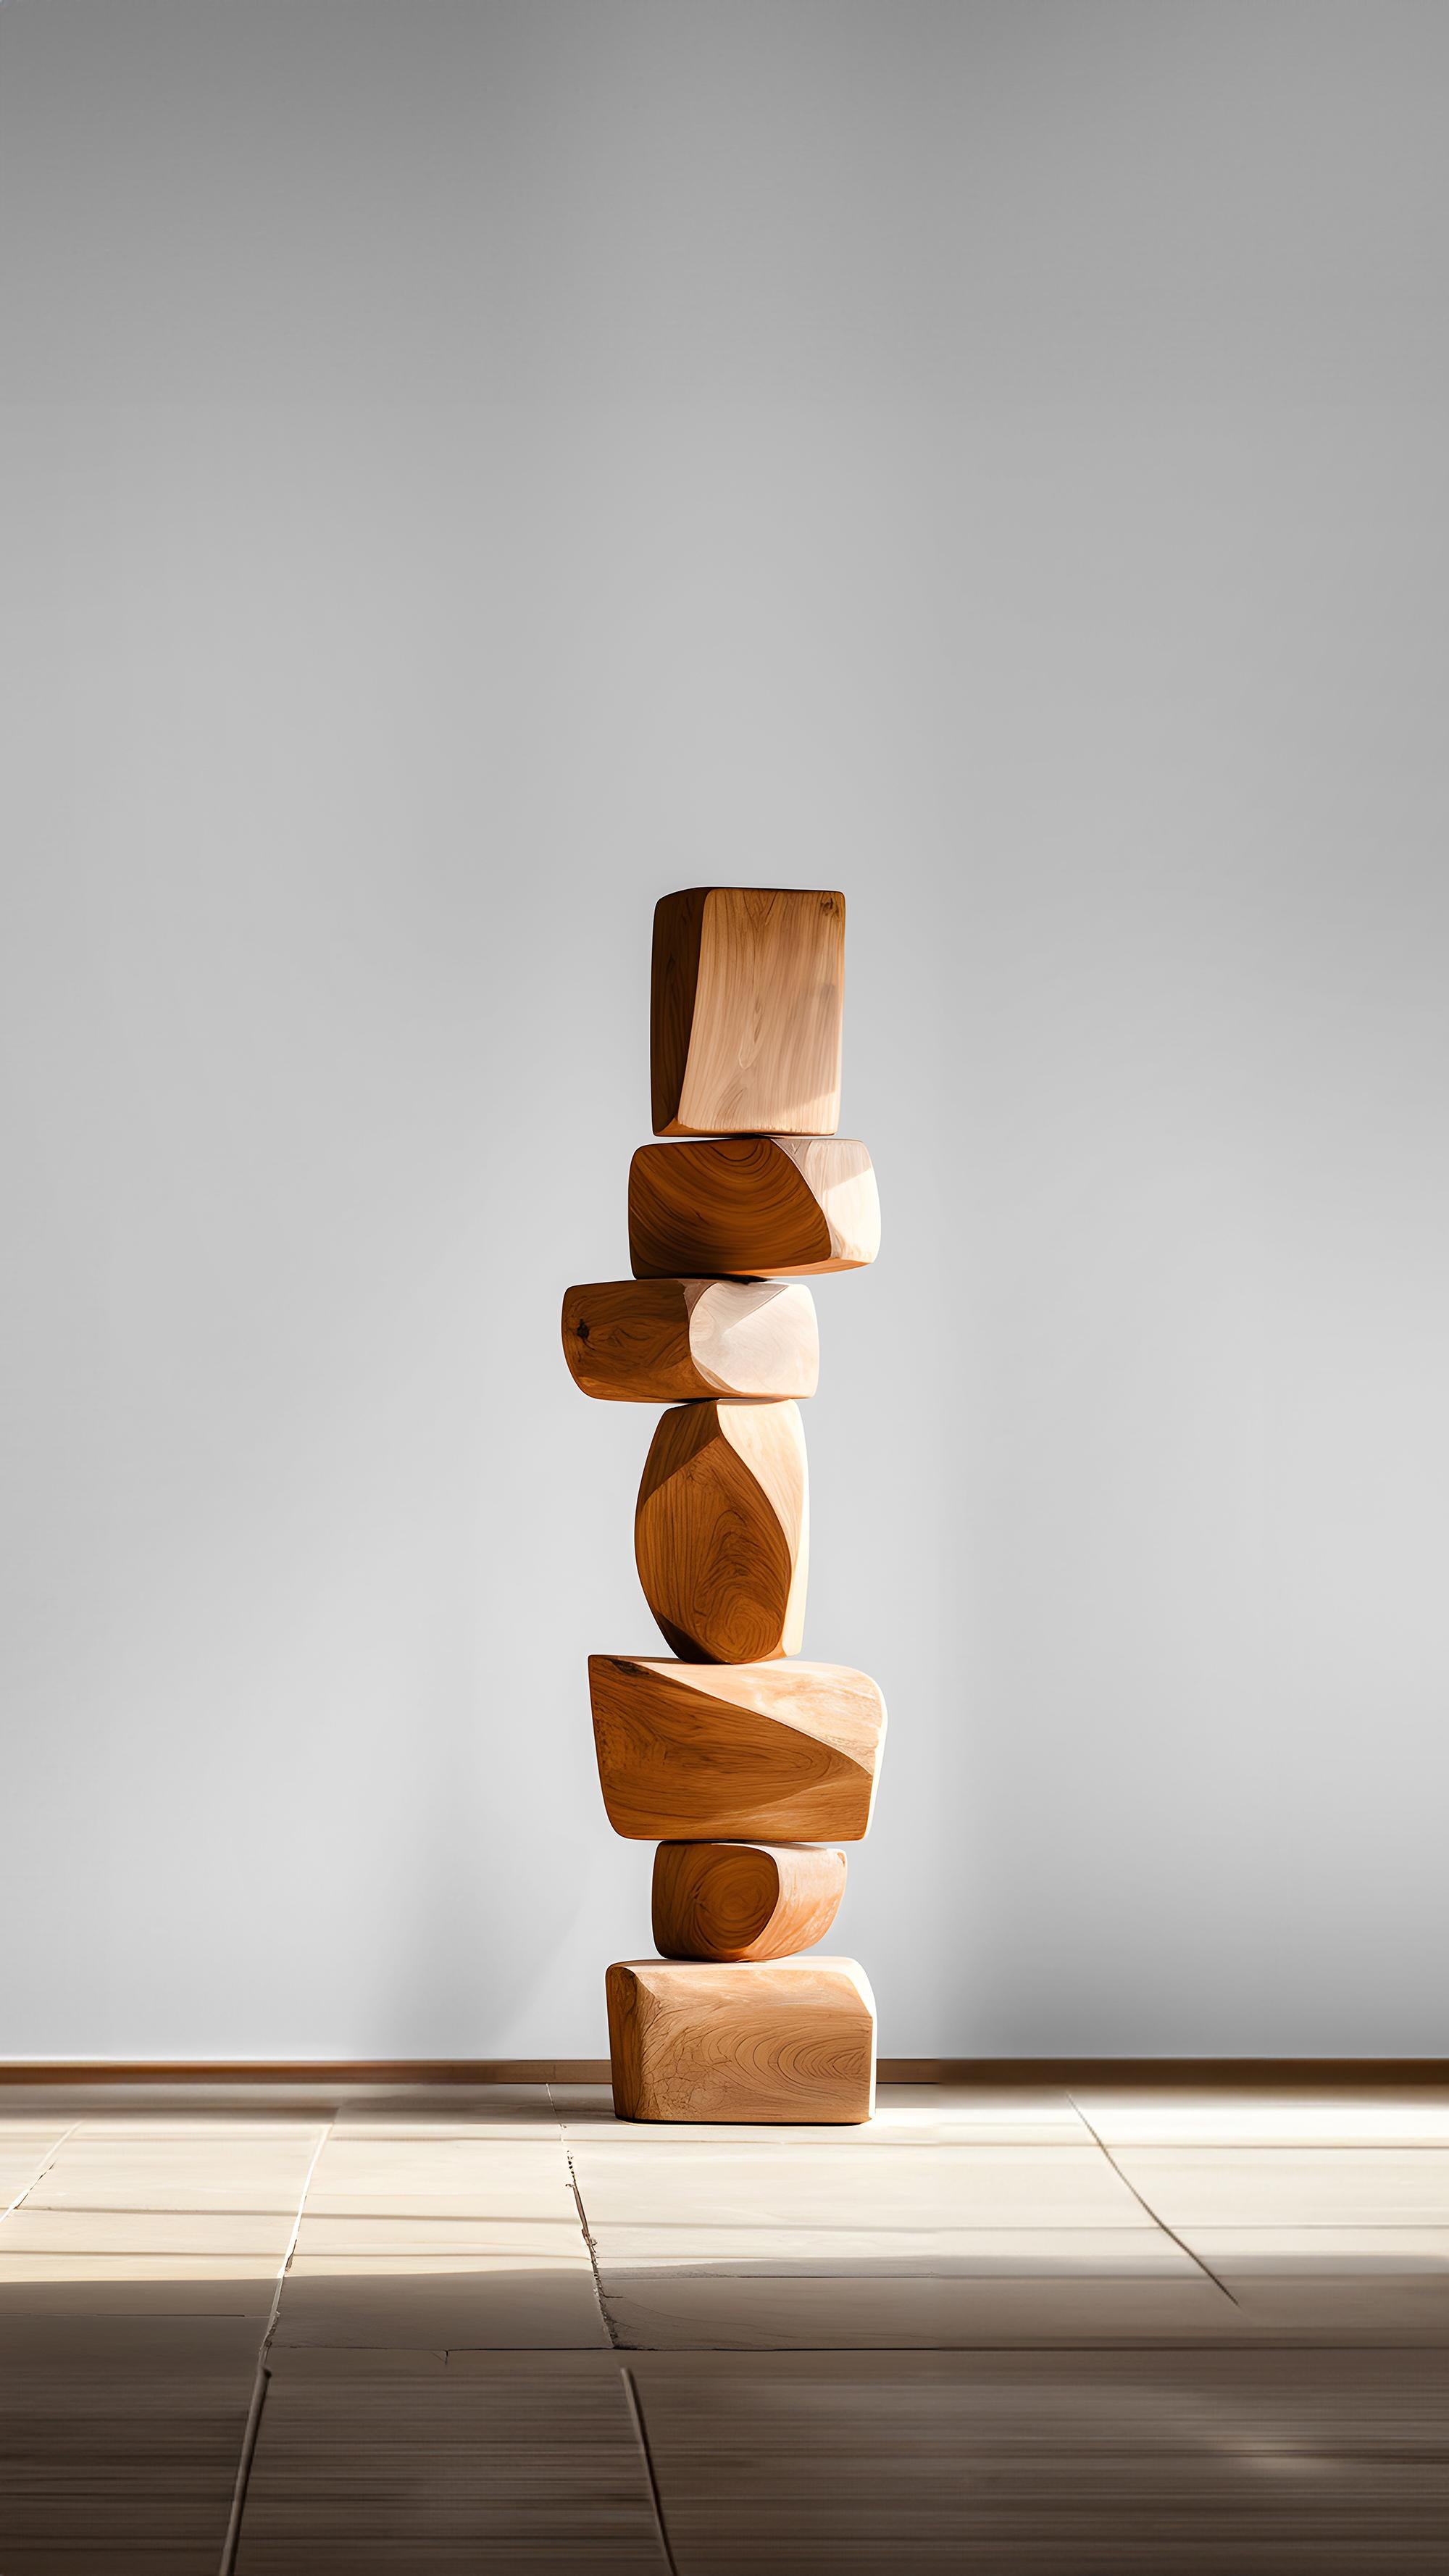 Hand-Crafted Biomorphic Serenity: Abstract Oak Totem Still Stand No61 by NONO For Sale